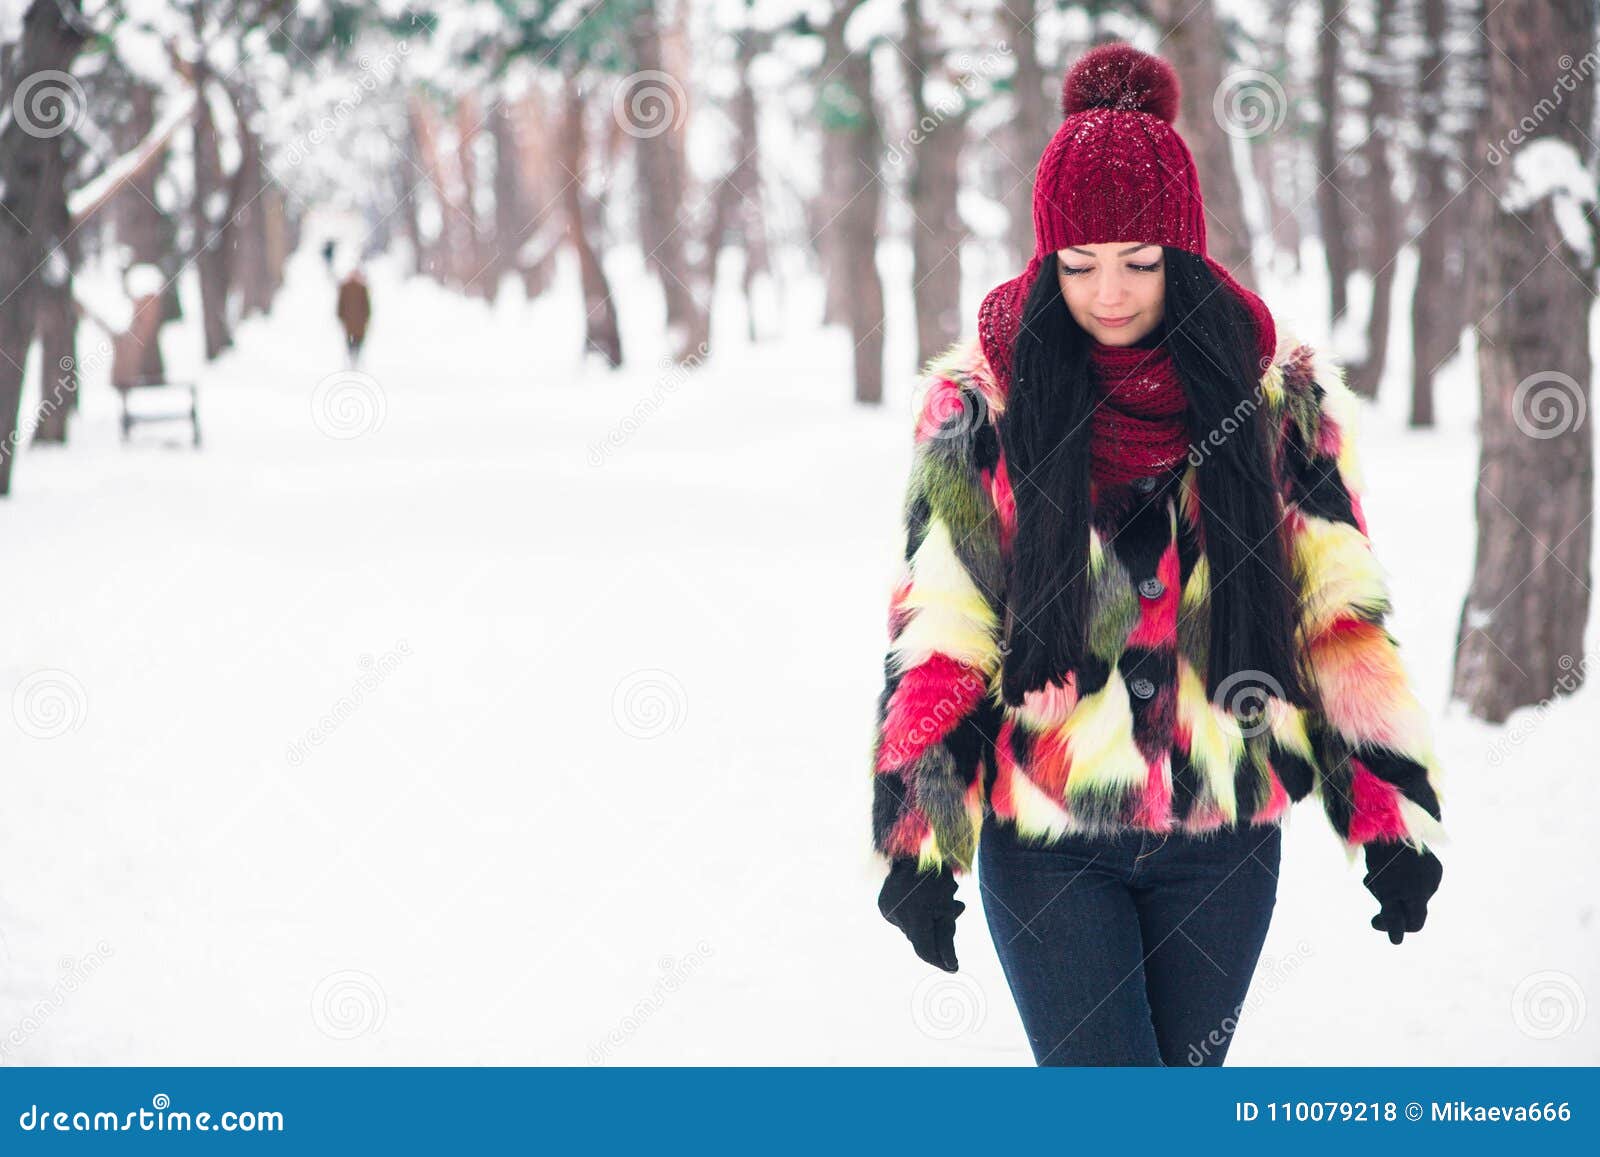 Young Woman in Multi-colored Fur Coat Stock Photo - Image of smile ...